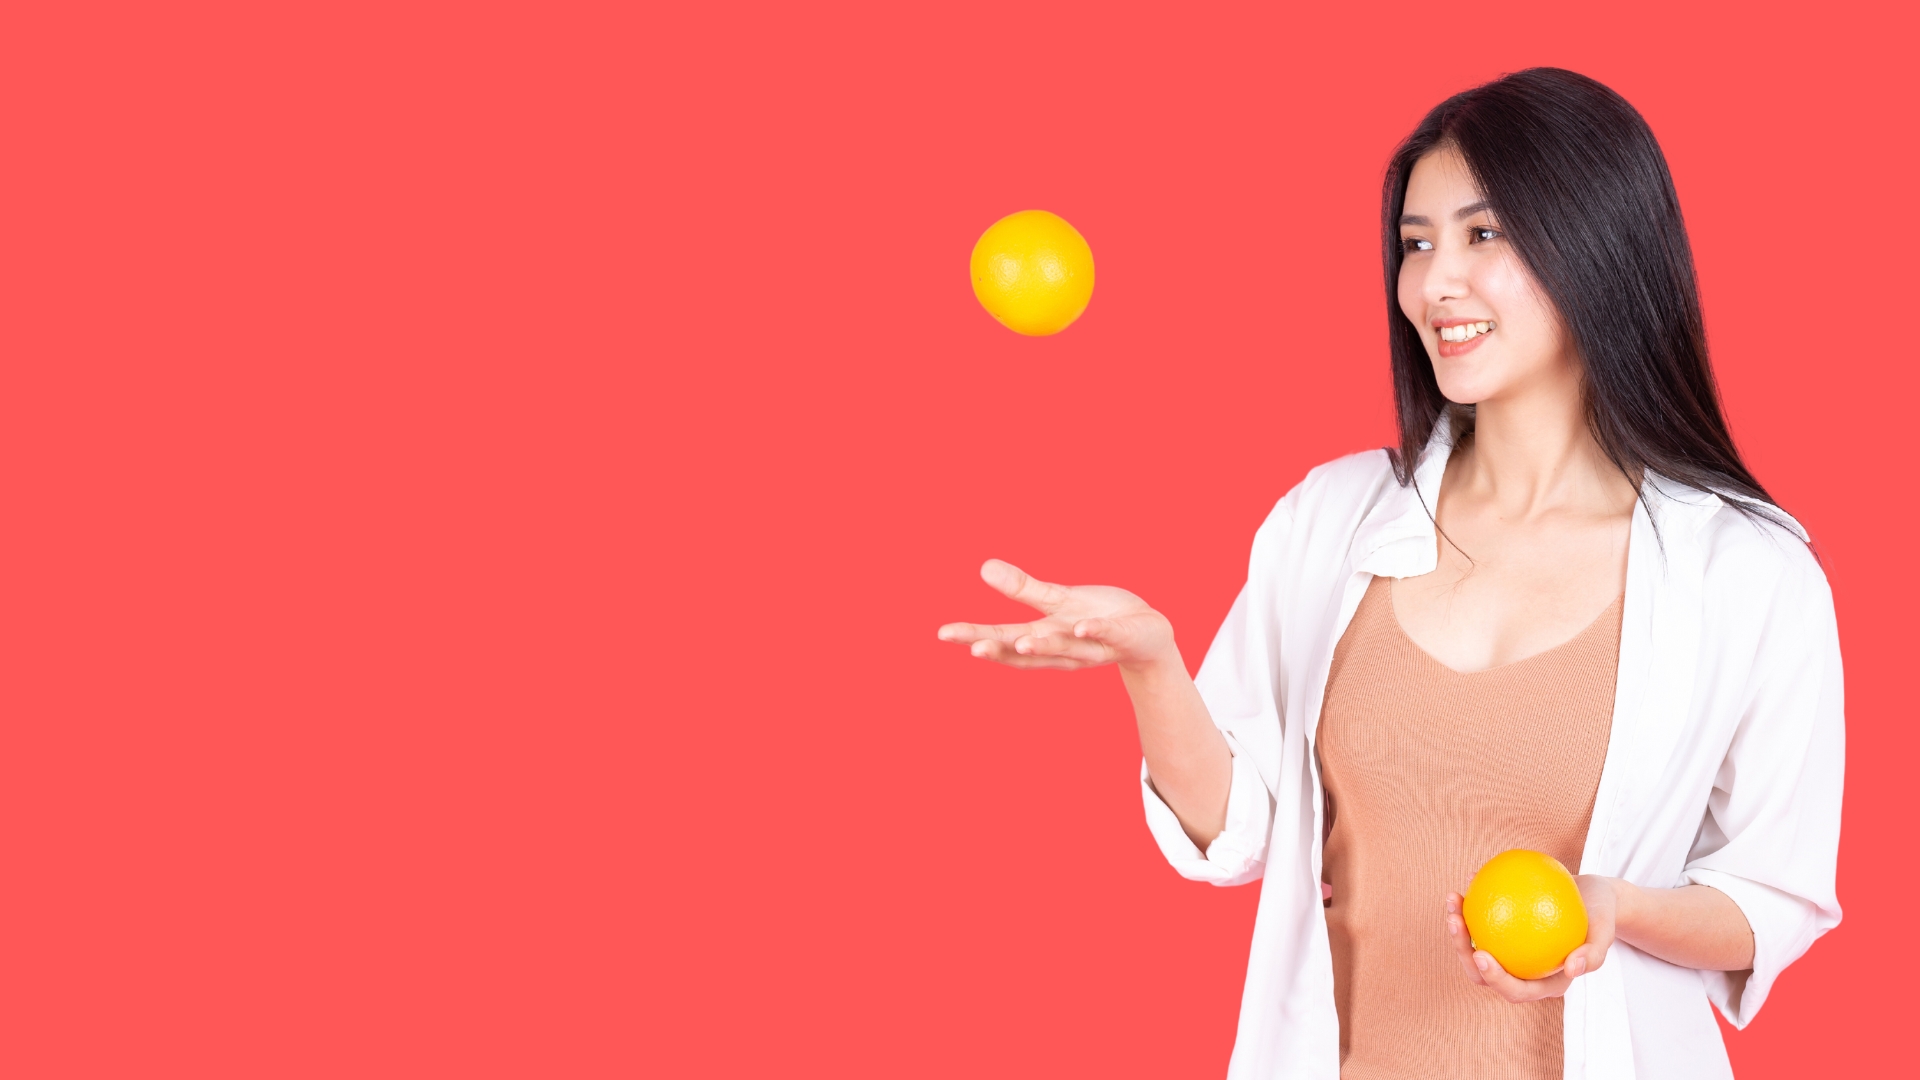 woman juggling oranges on red background for PMM priorities